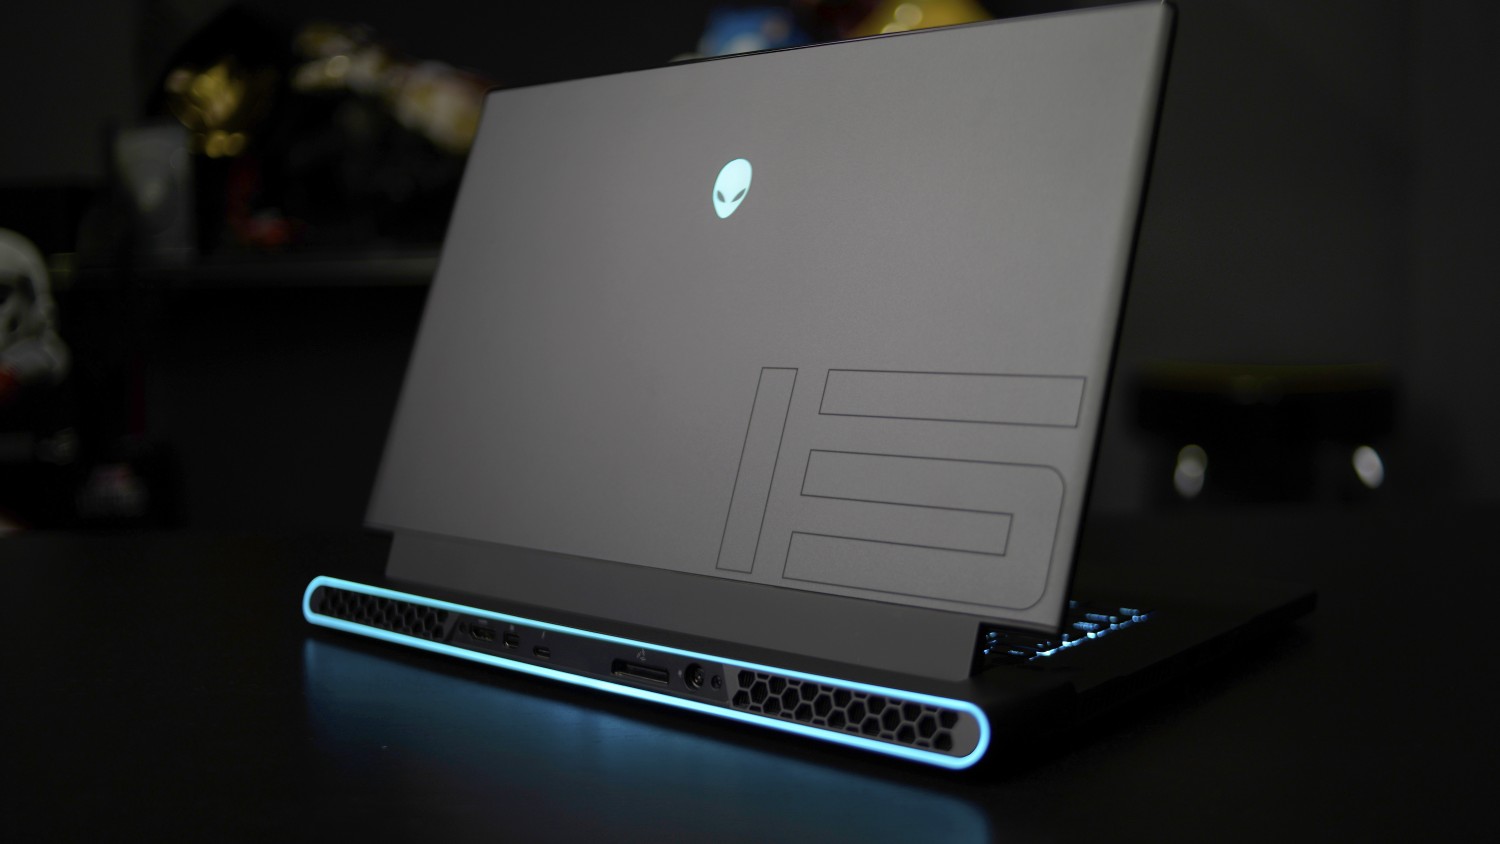 Alienware M15 R2 Review: A Powerful Gaming Laptop